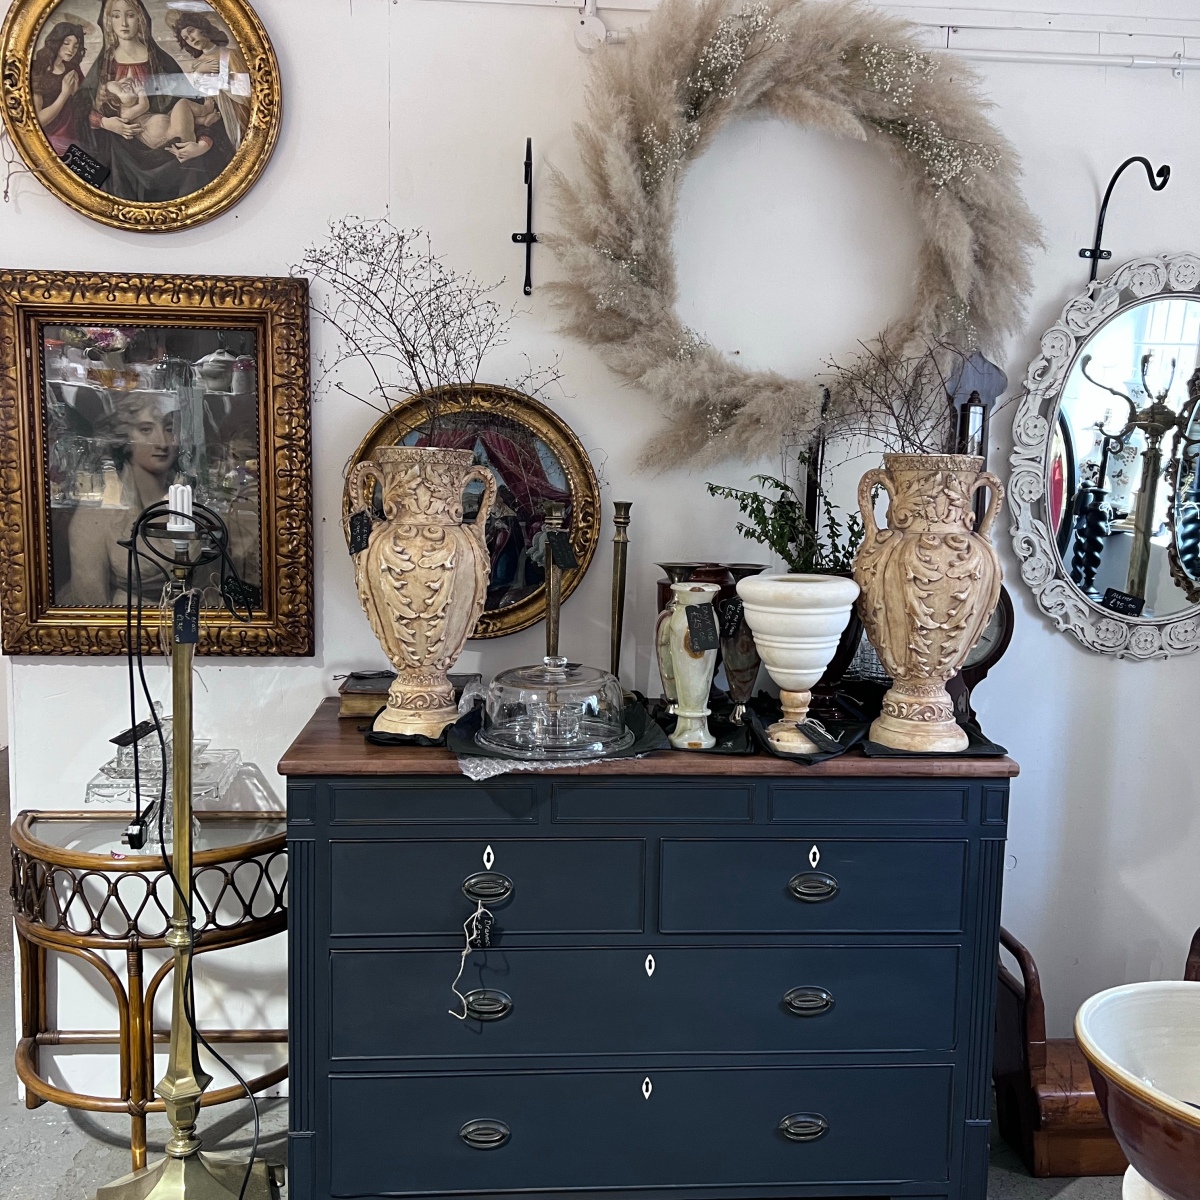 Top tips for Antiques Shopping